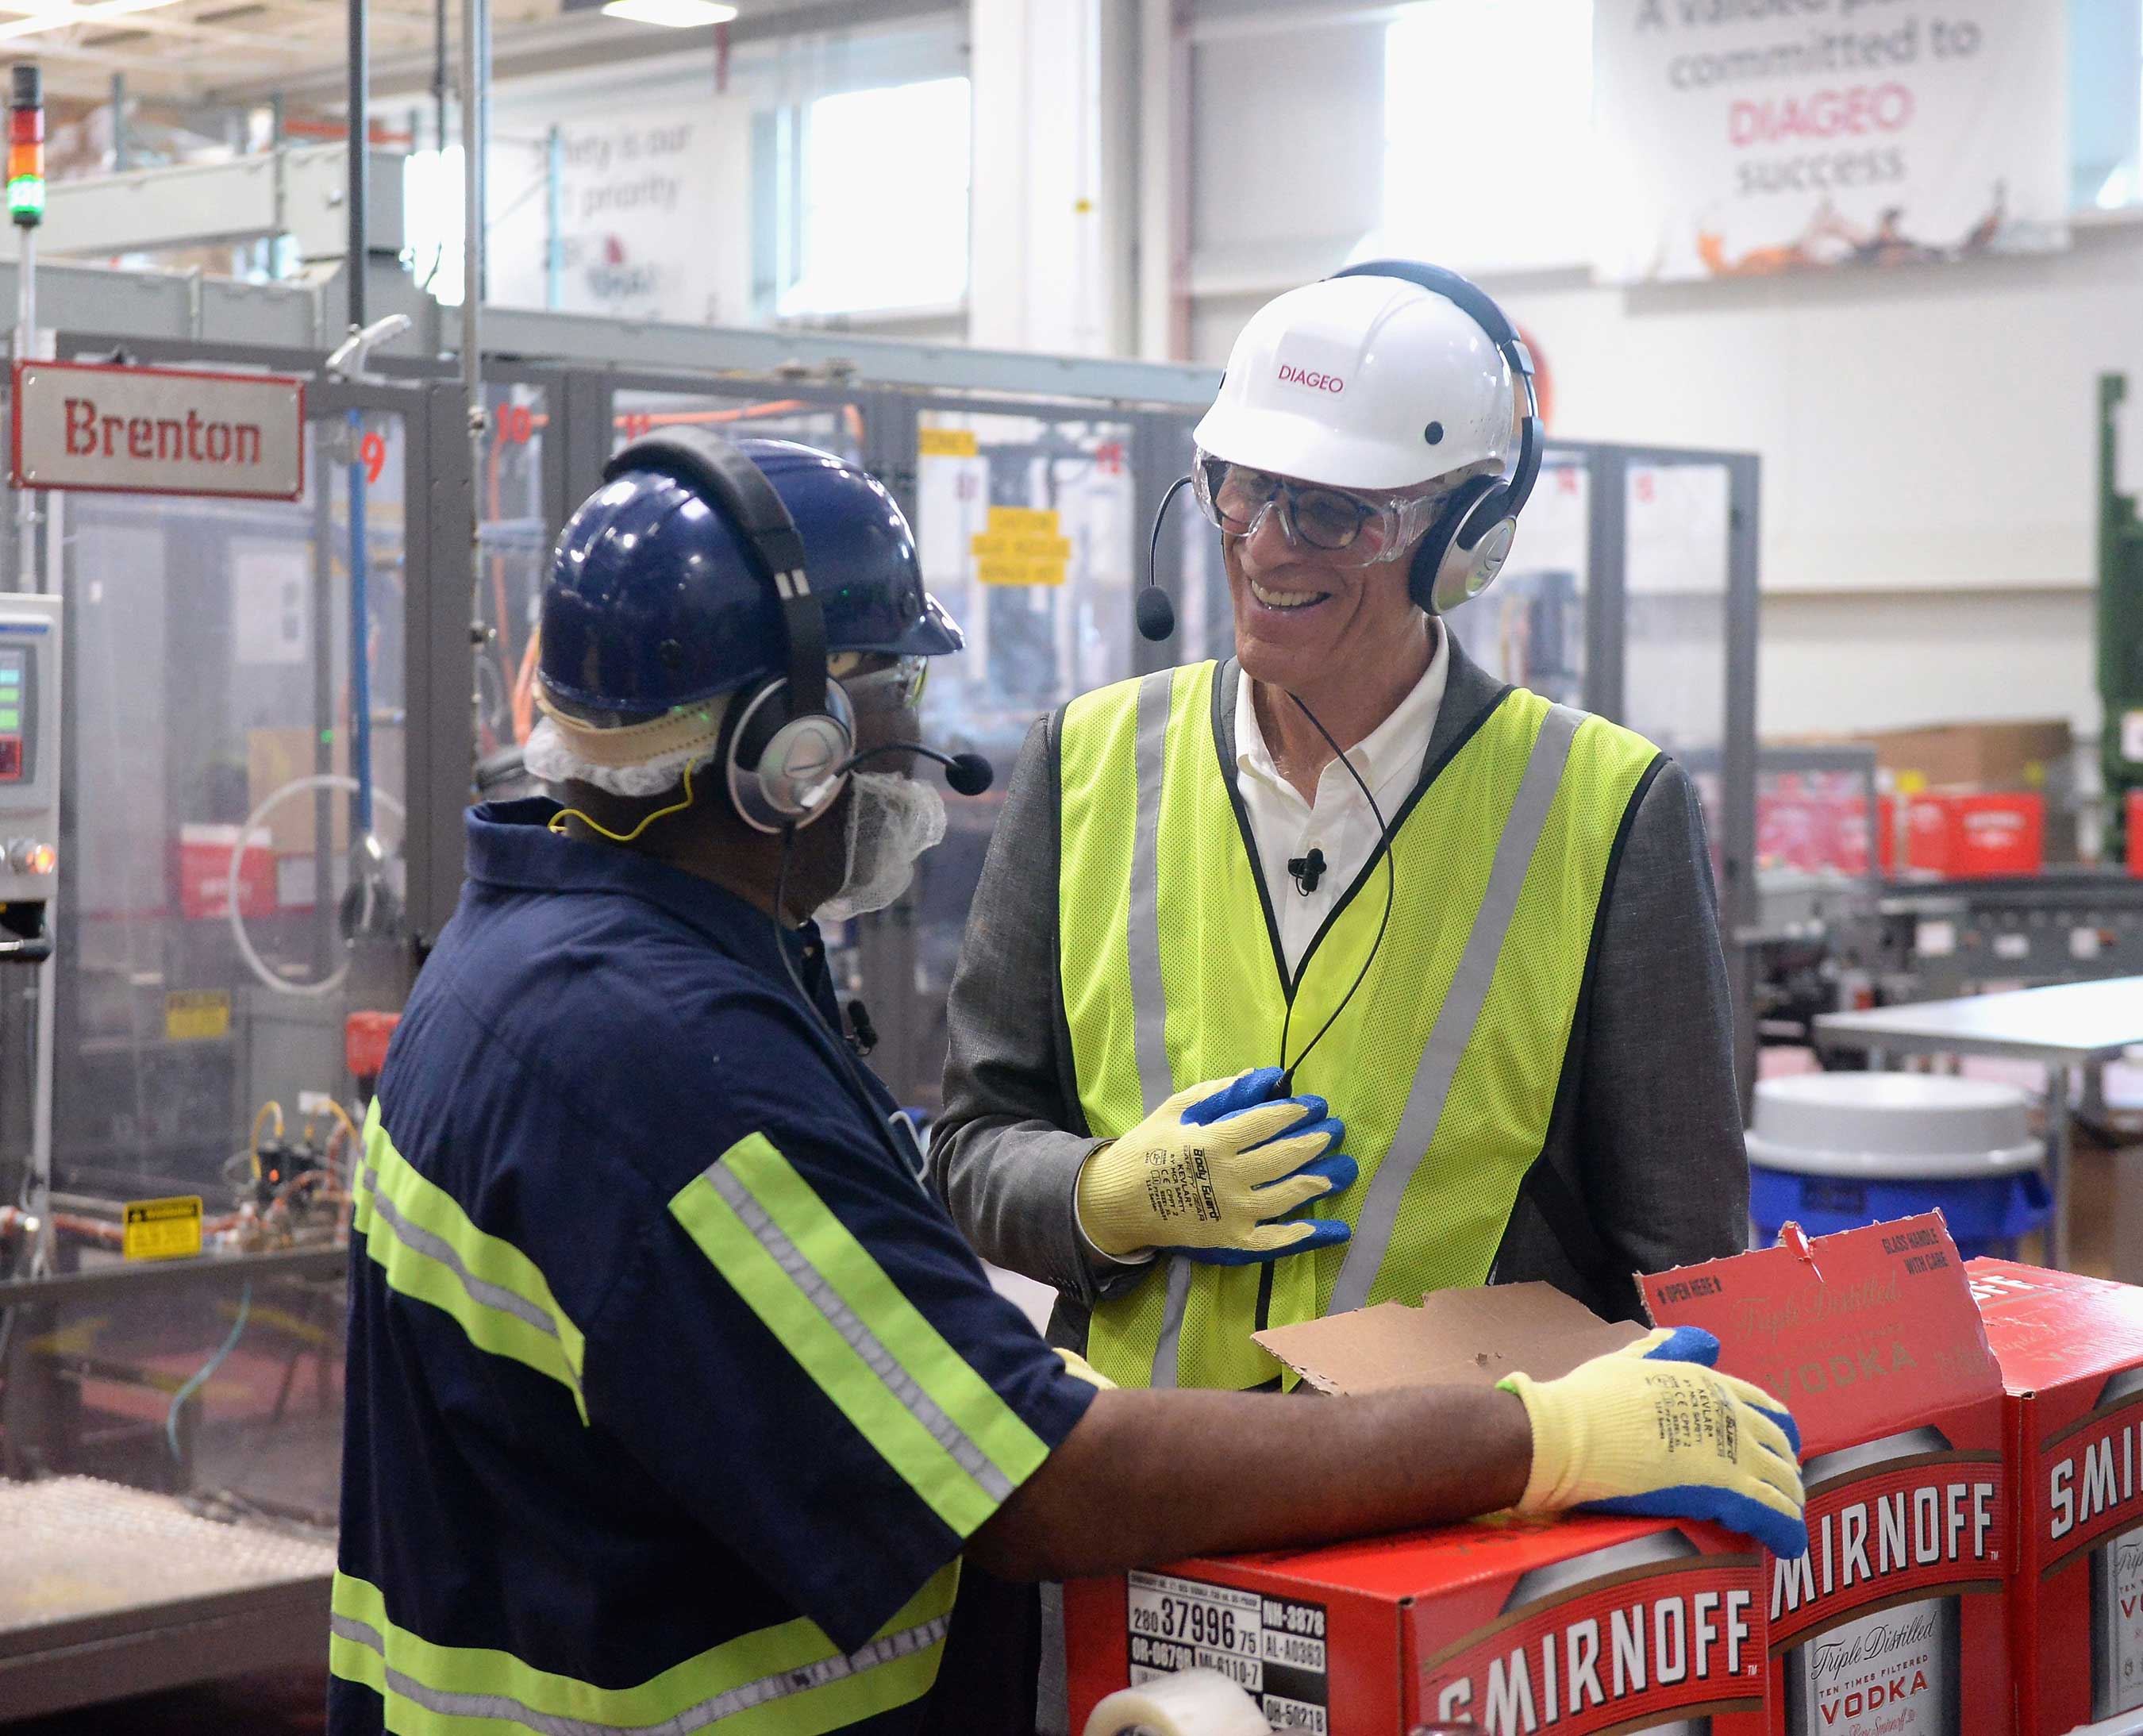 Actor and environmentalist, Ted Danson, Tours The Diageo Facility in Plainfield, Illinois to See How SMIRNOFF, America’s No. 1 Vodka, is Made First-hand on October 4, 2017